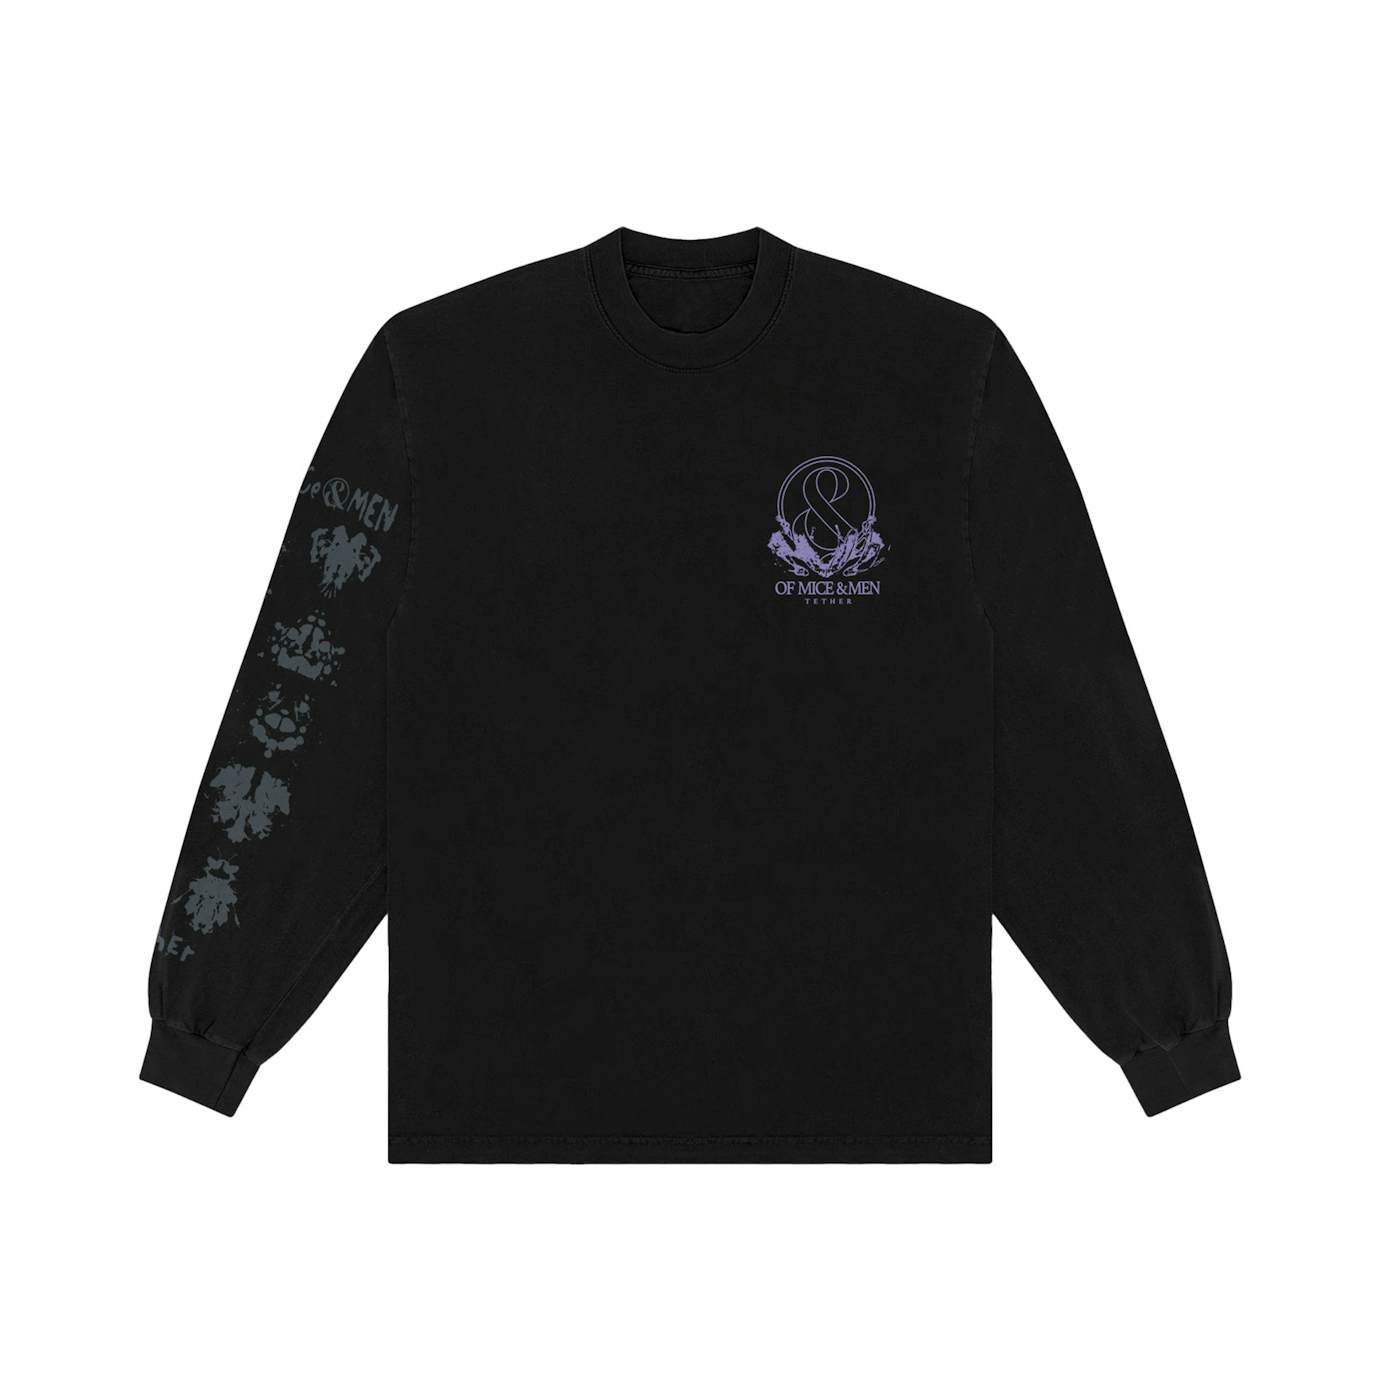  Of Mice & Men - Tether Long Sleeve